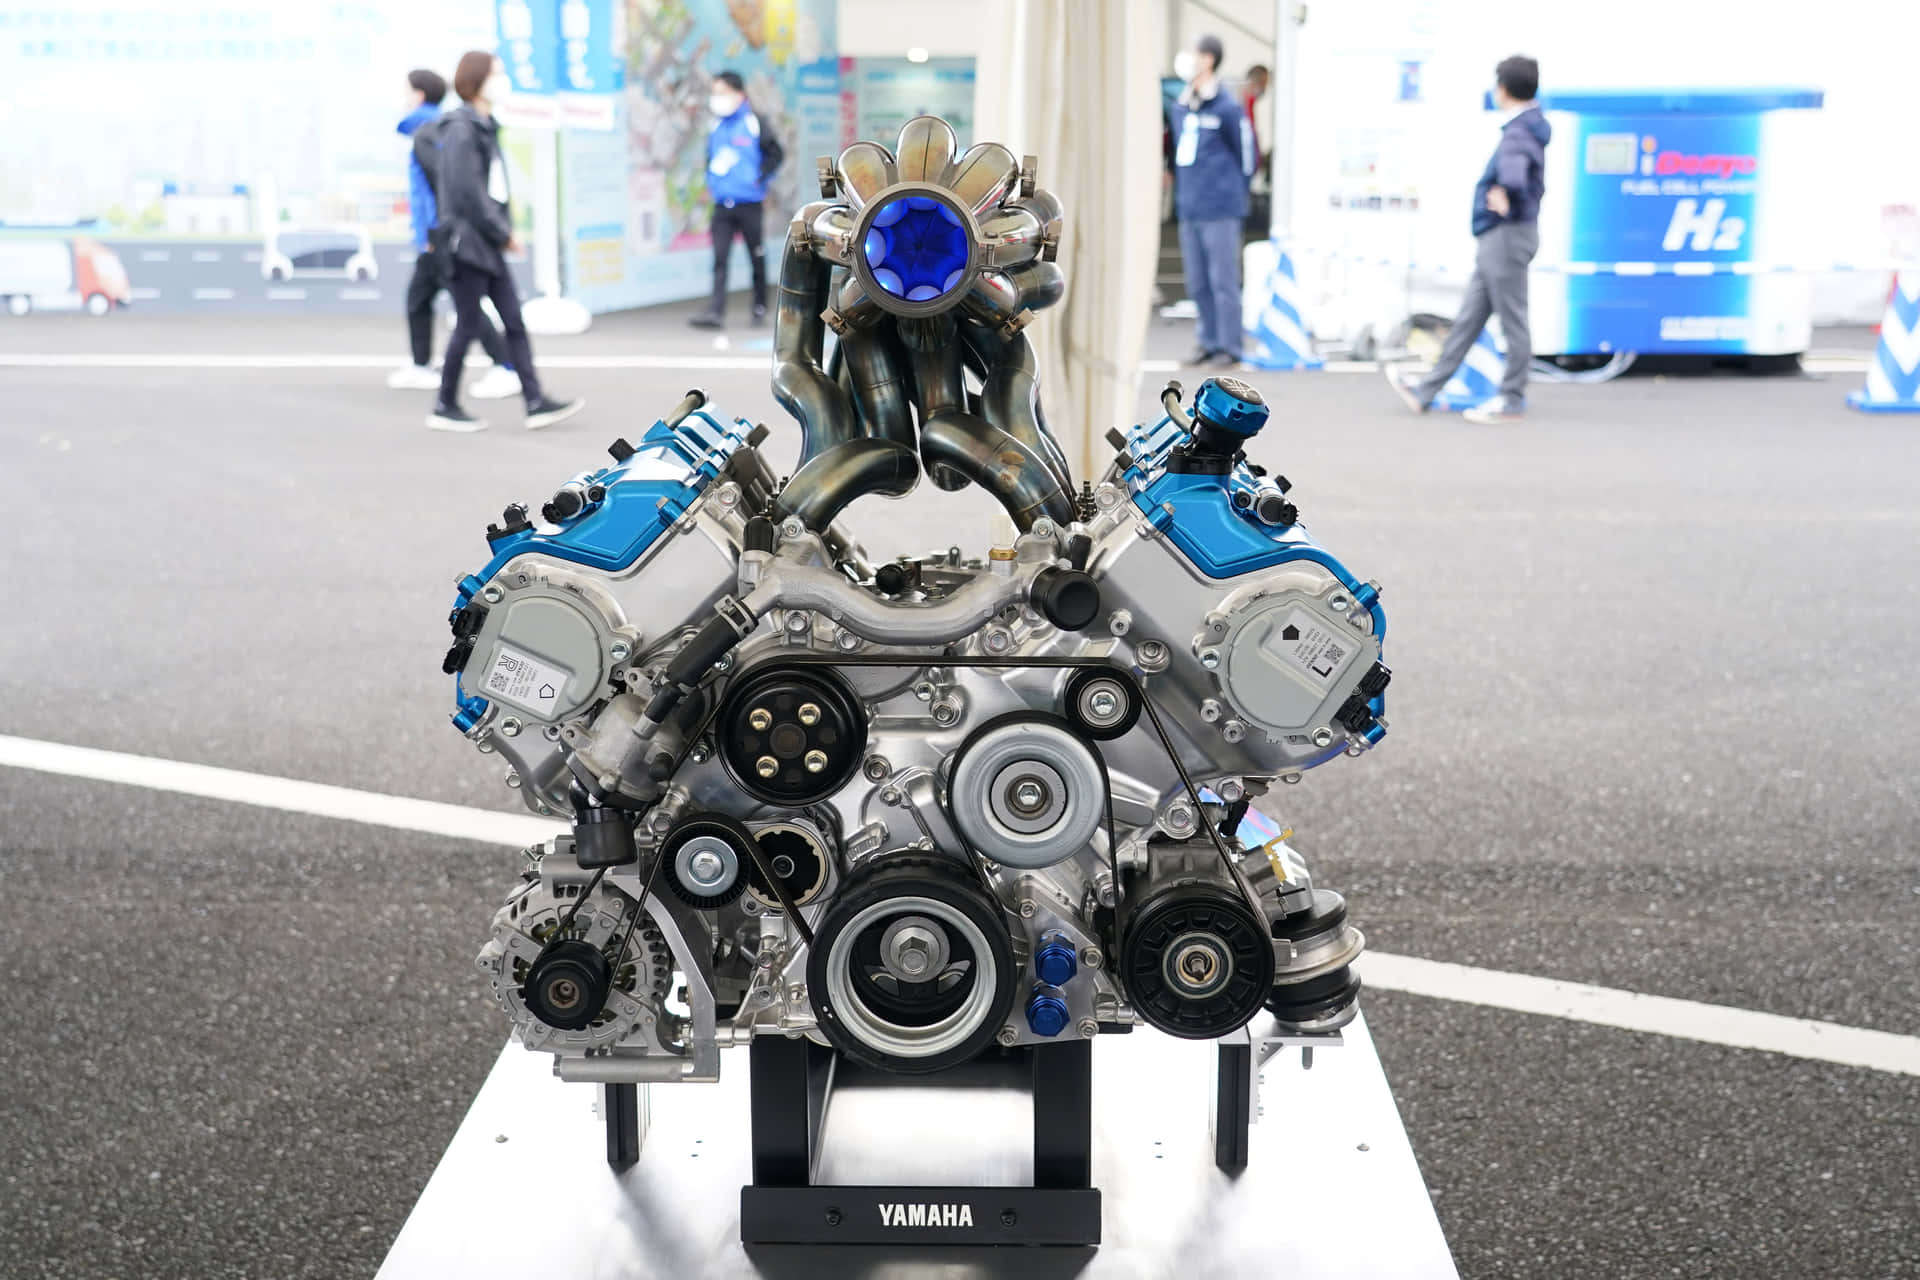 A Blue Engine On Display In A Room